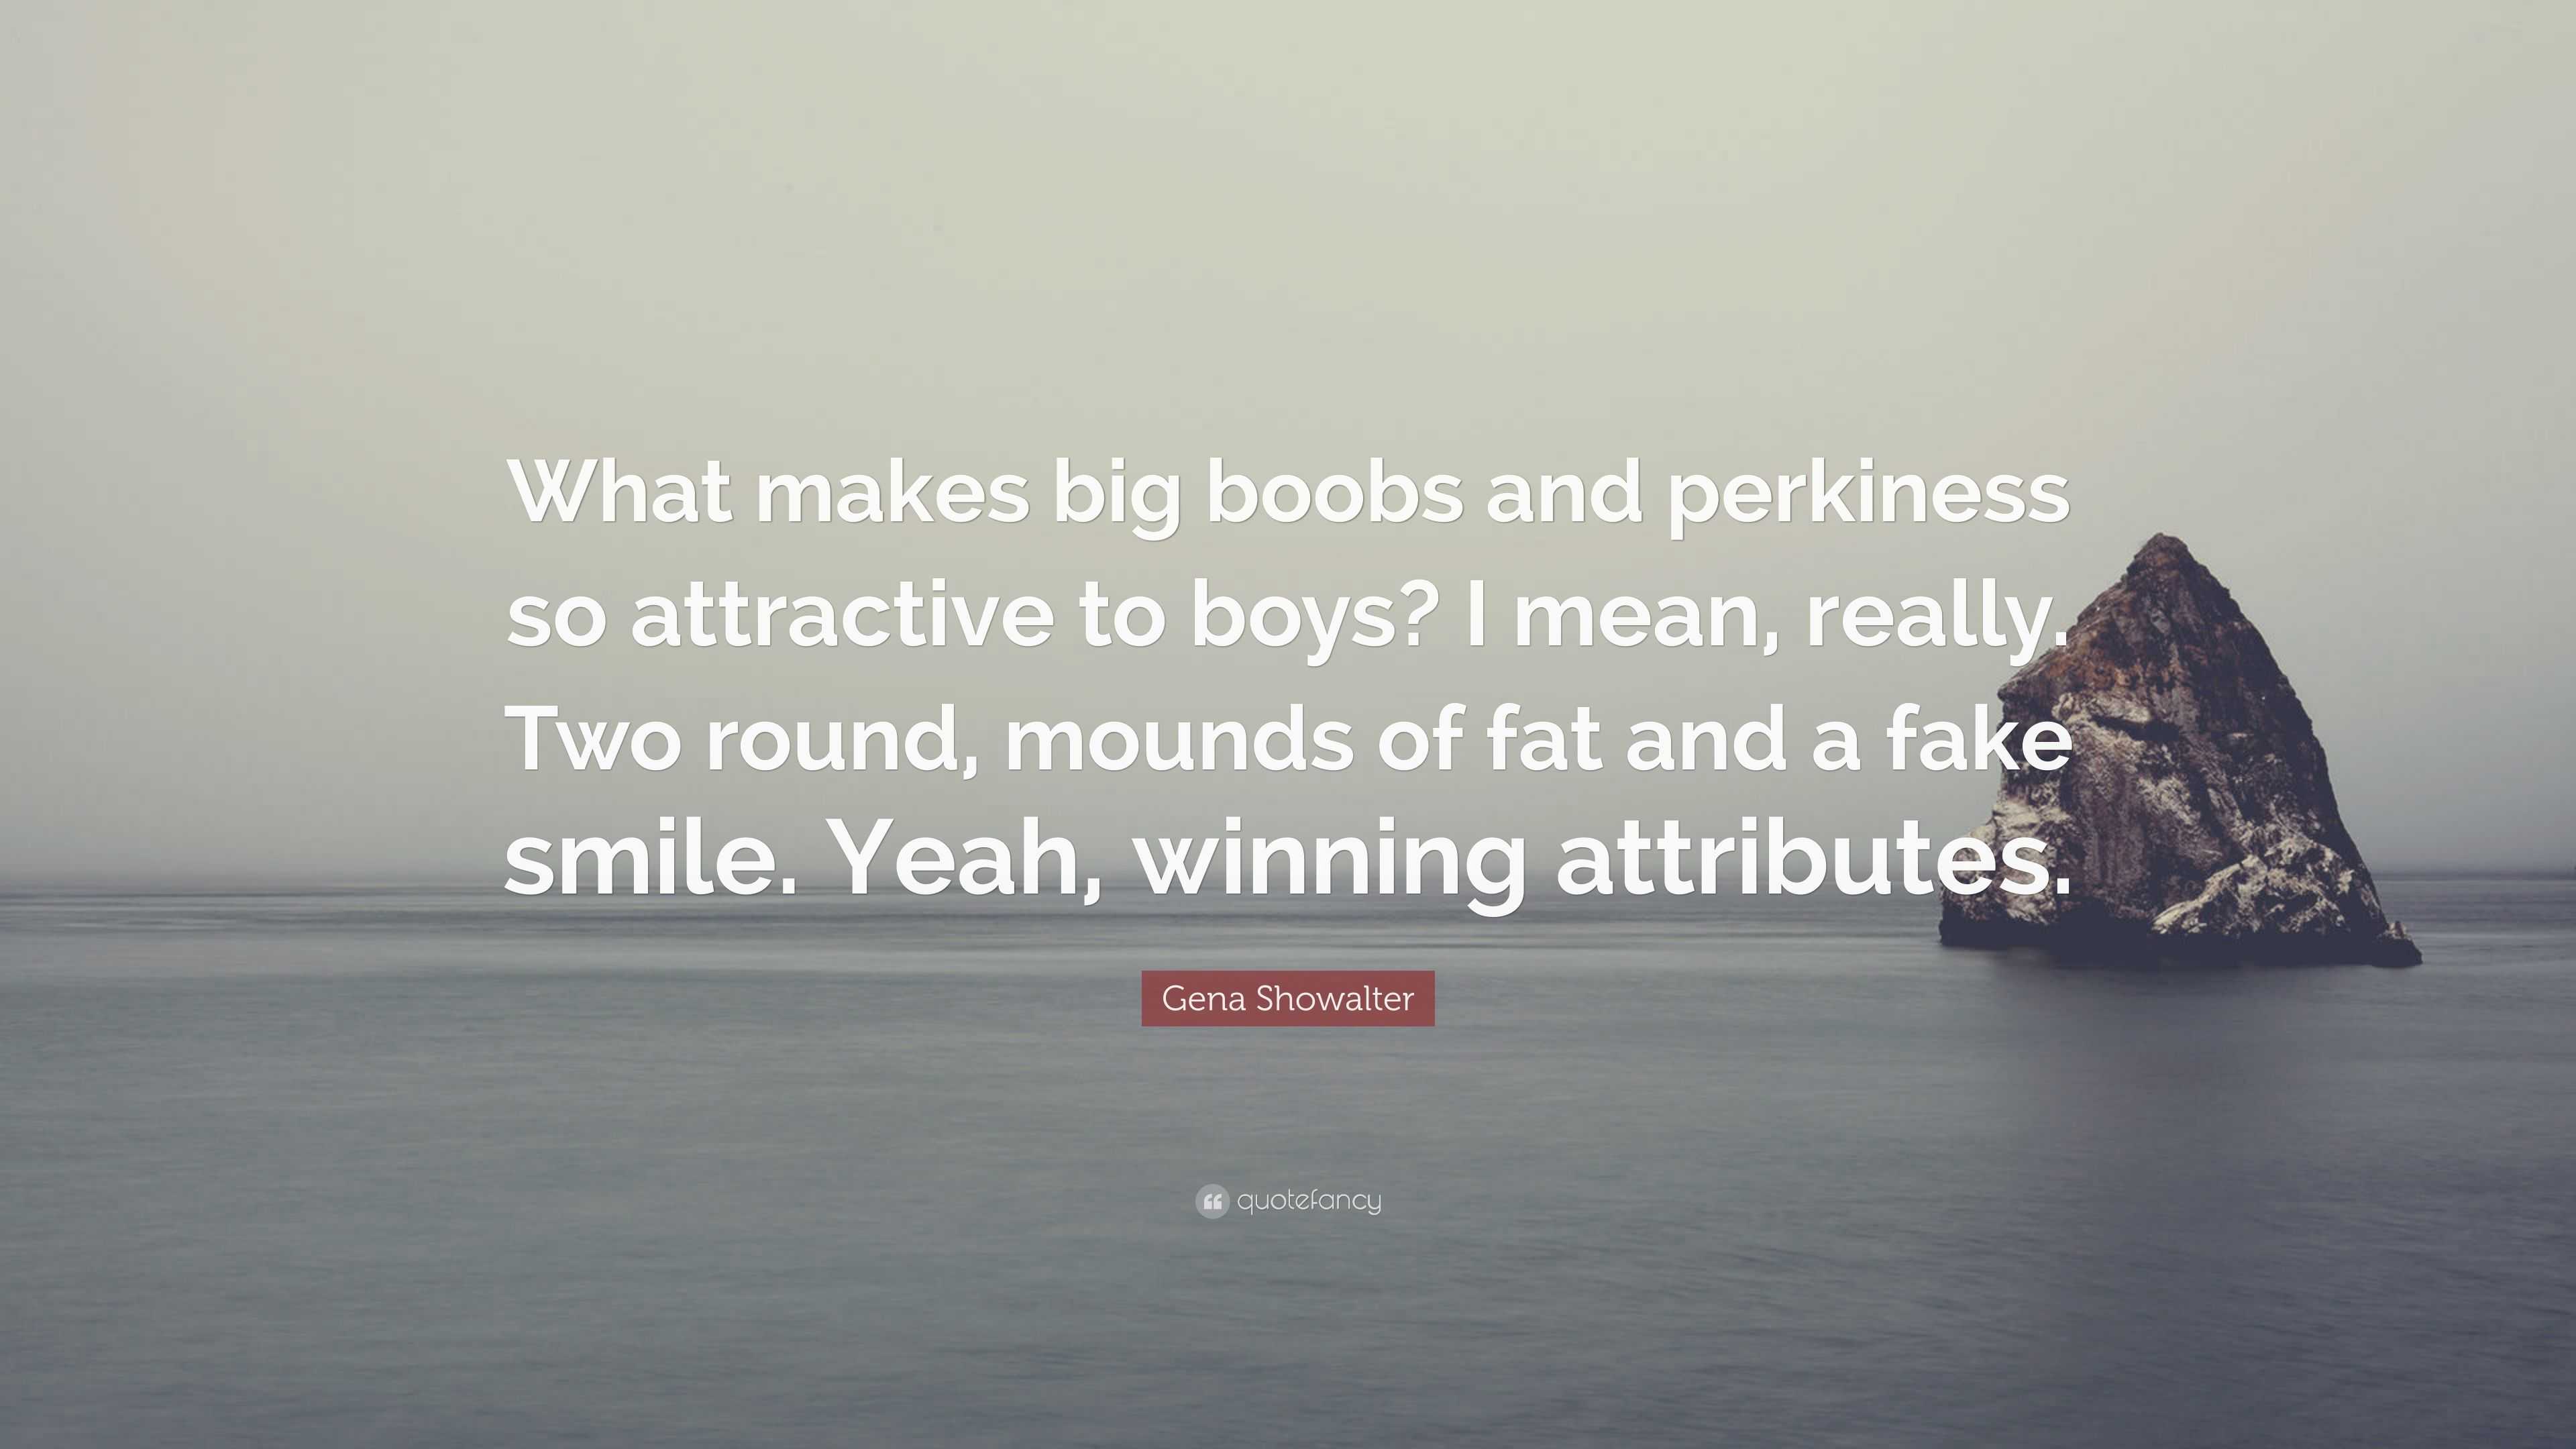 Gena Showalter Quote: “What makes big boobs and perkiness so